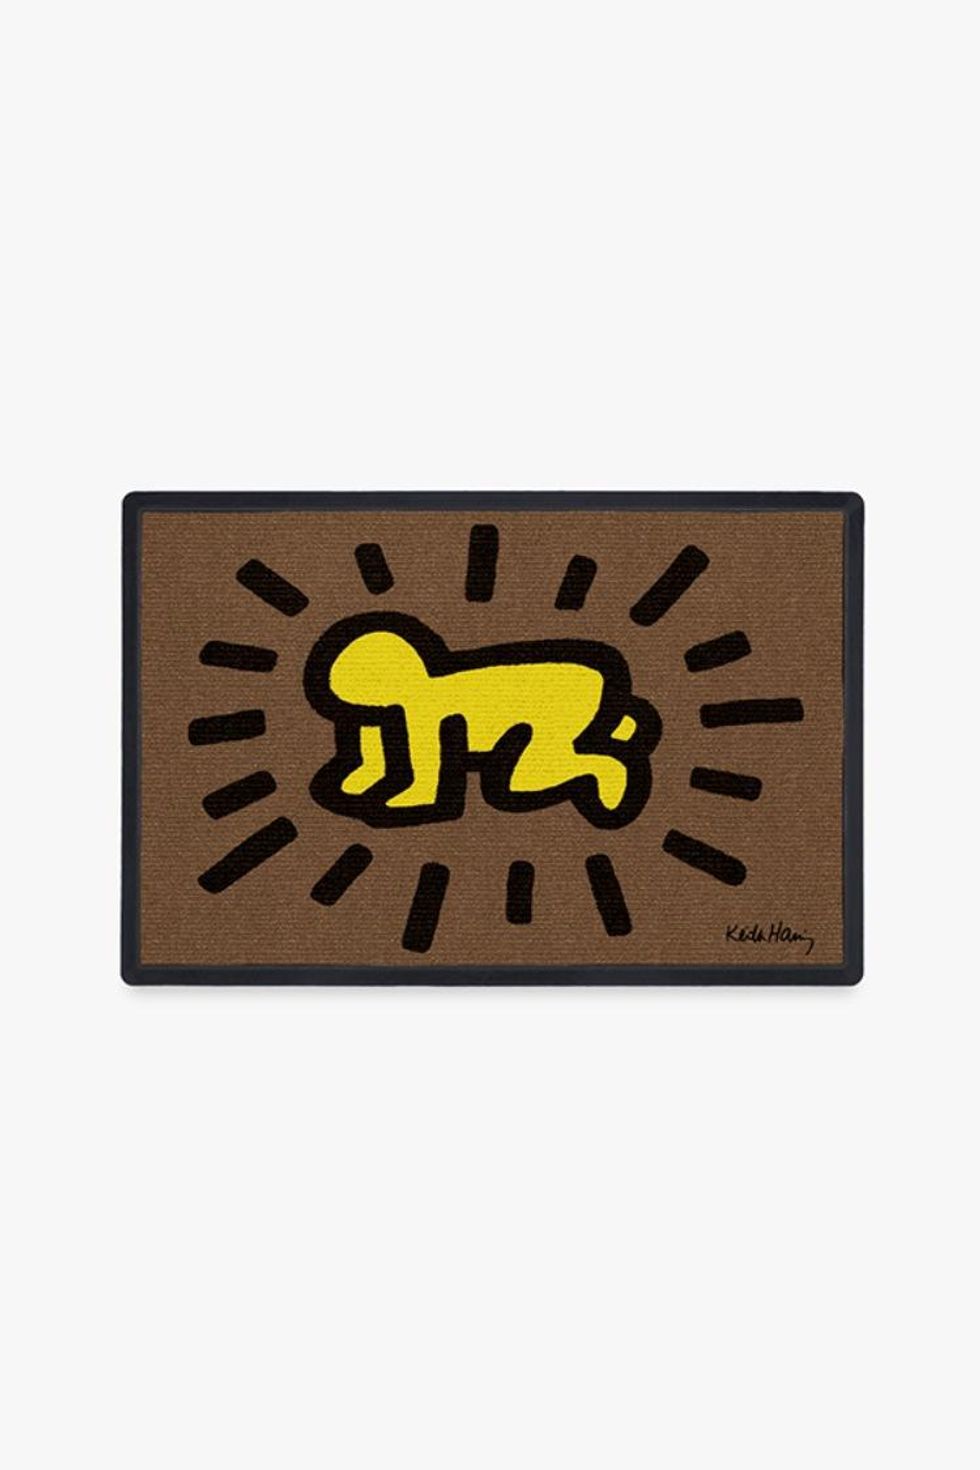 keith-haring-radiant-baby-yellow-a-rc-kh001-dm23.jpg